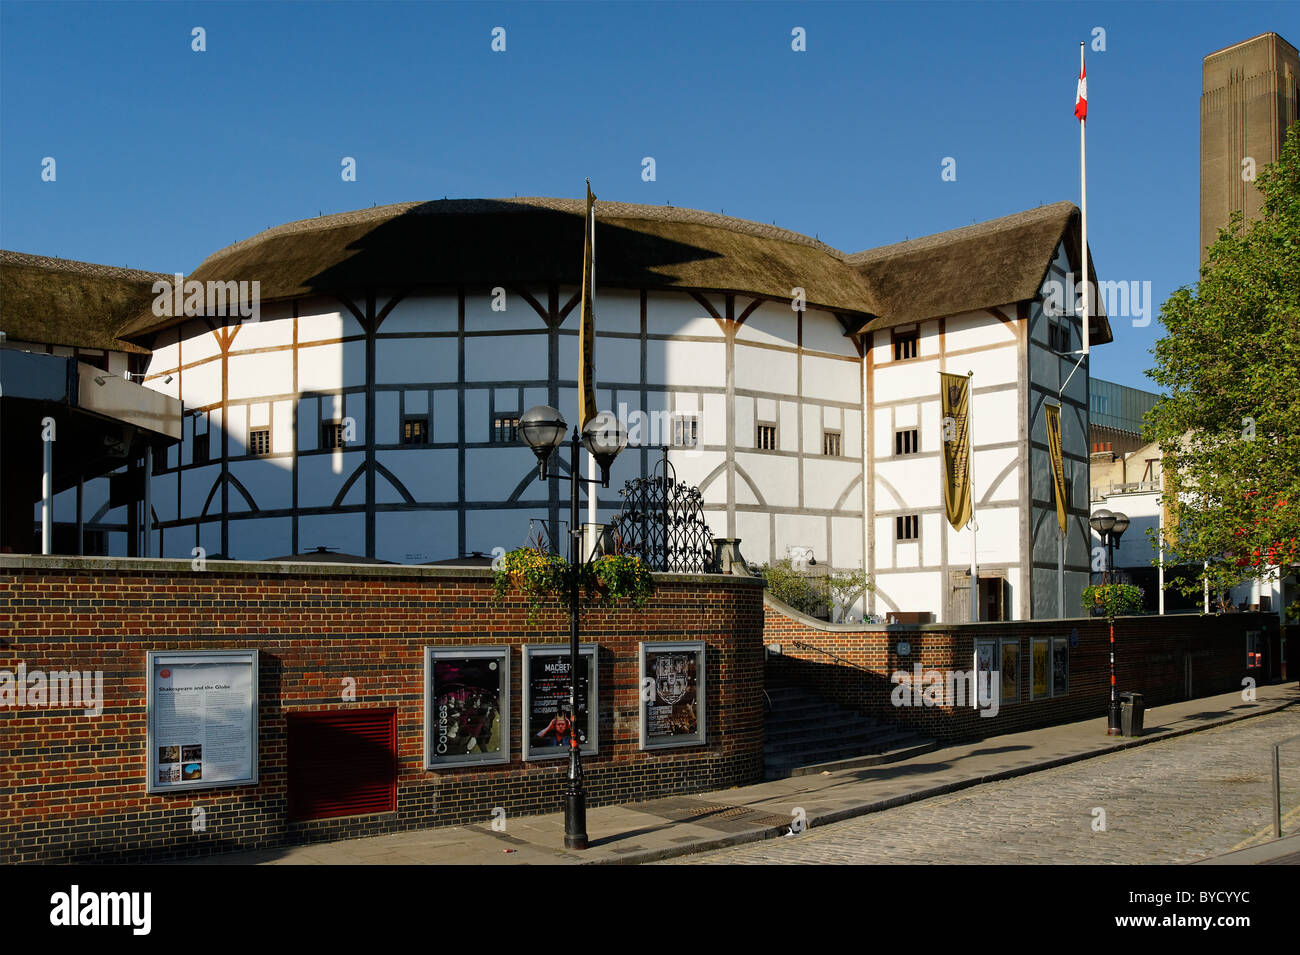 LONDON, UK - MAY 24, 2010:  Exterior view of Shakespeare's Globe Theatre in Southwark Stock Photo